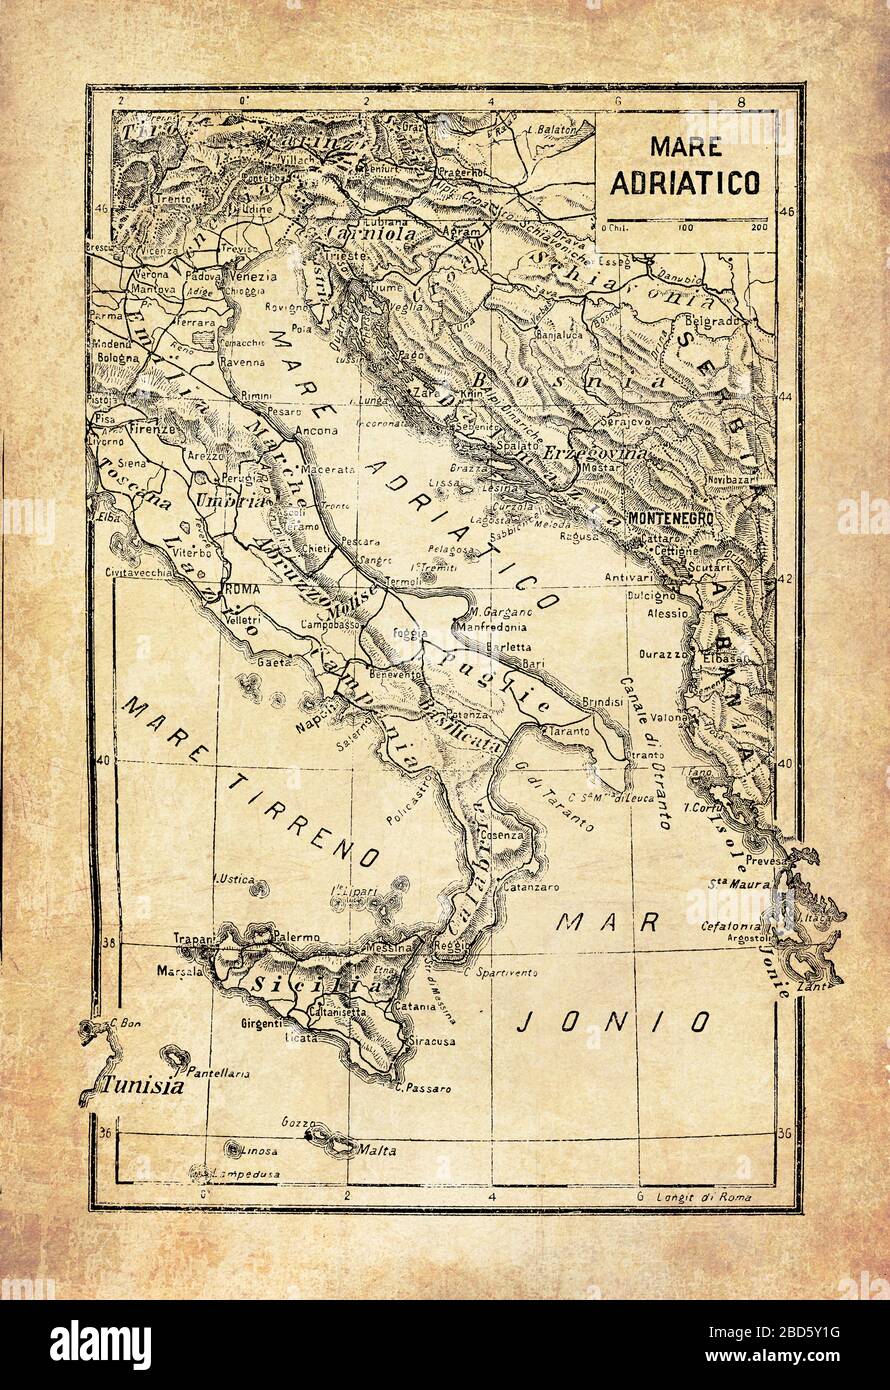 Ancient map of Adriatic,Jonian and Tyrrhenian seas, as part of the Mediterranean near the coasts of Italy and Sicily with geographical Italian names and descriptions Stock Photo